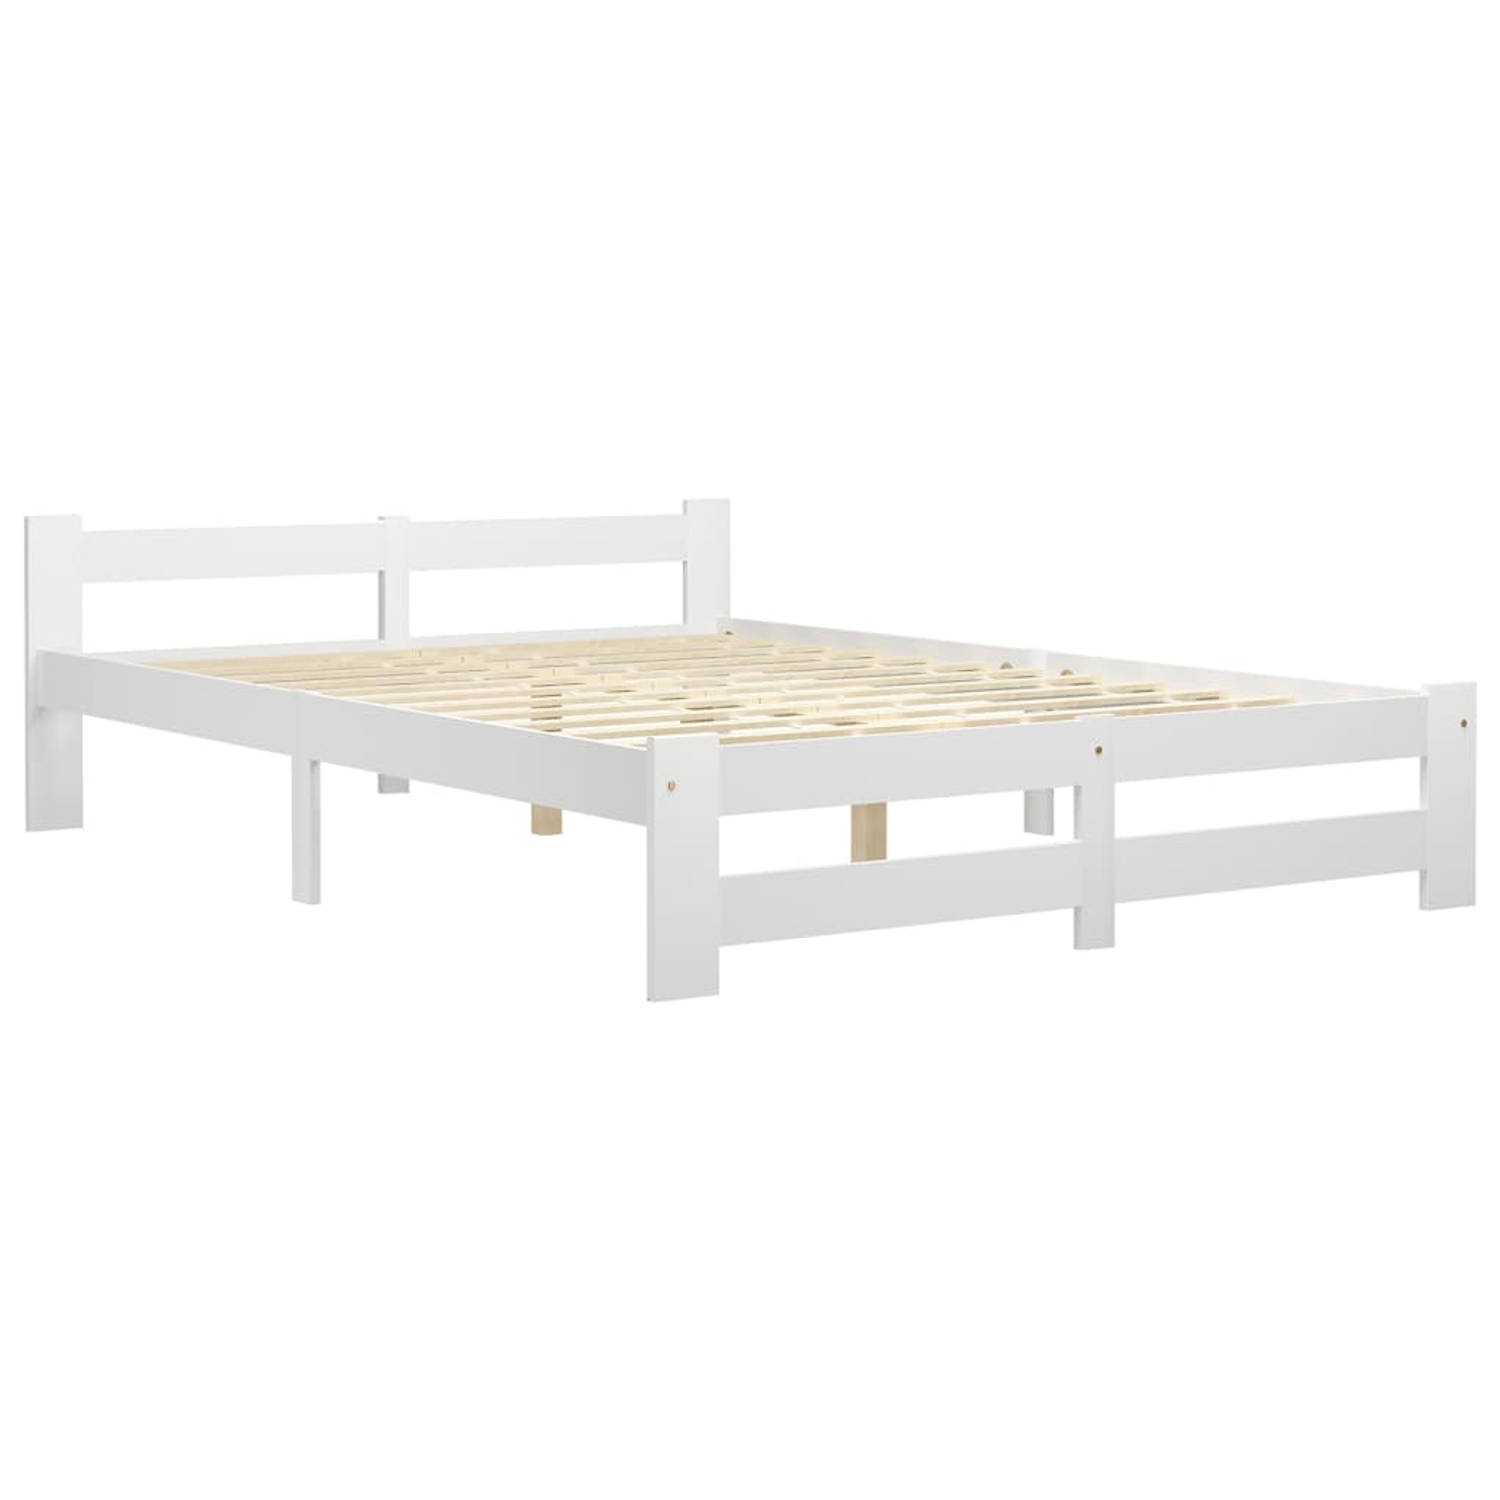 The Living Store Bedframe massief grenenhout wit 120x200 cm - Bedframe - Bedframes - Bed Frame - Bed Frames - Bed - Bedden - Houten Bedframe - Houten Bedframes - 2-persoonsbed - 2